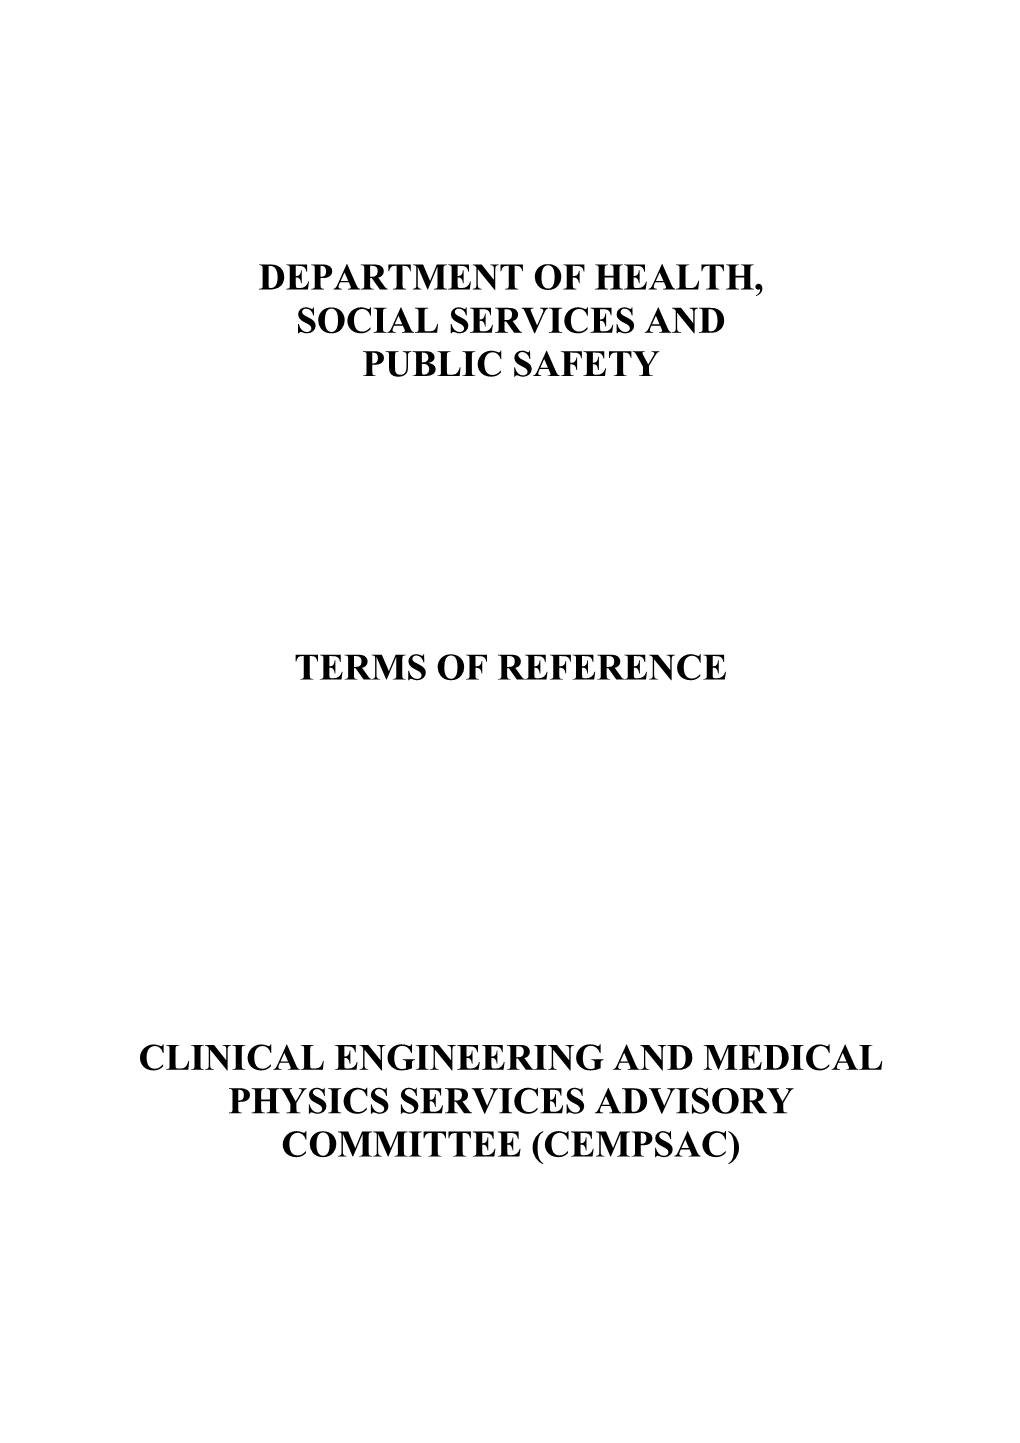 Clinical Engineering and Medical Physics Services Advisory Committee to the Department